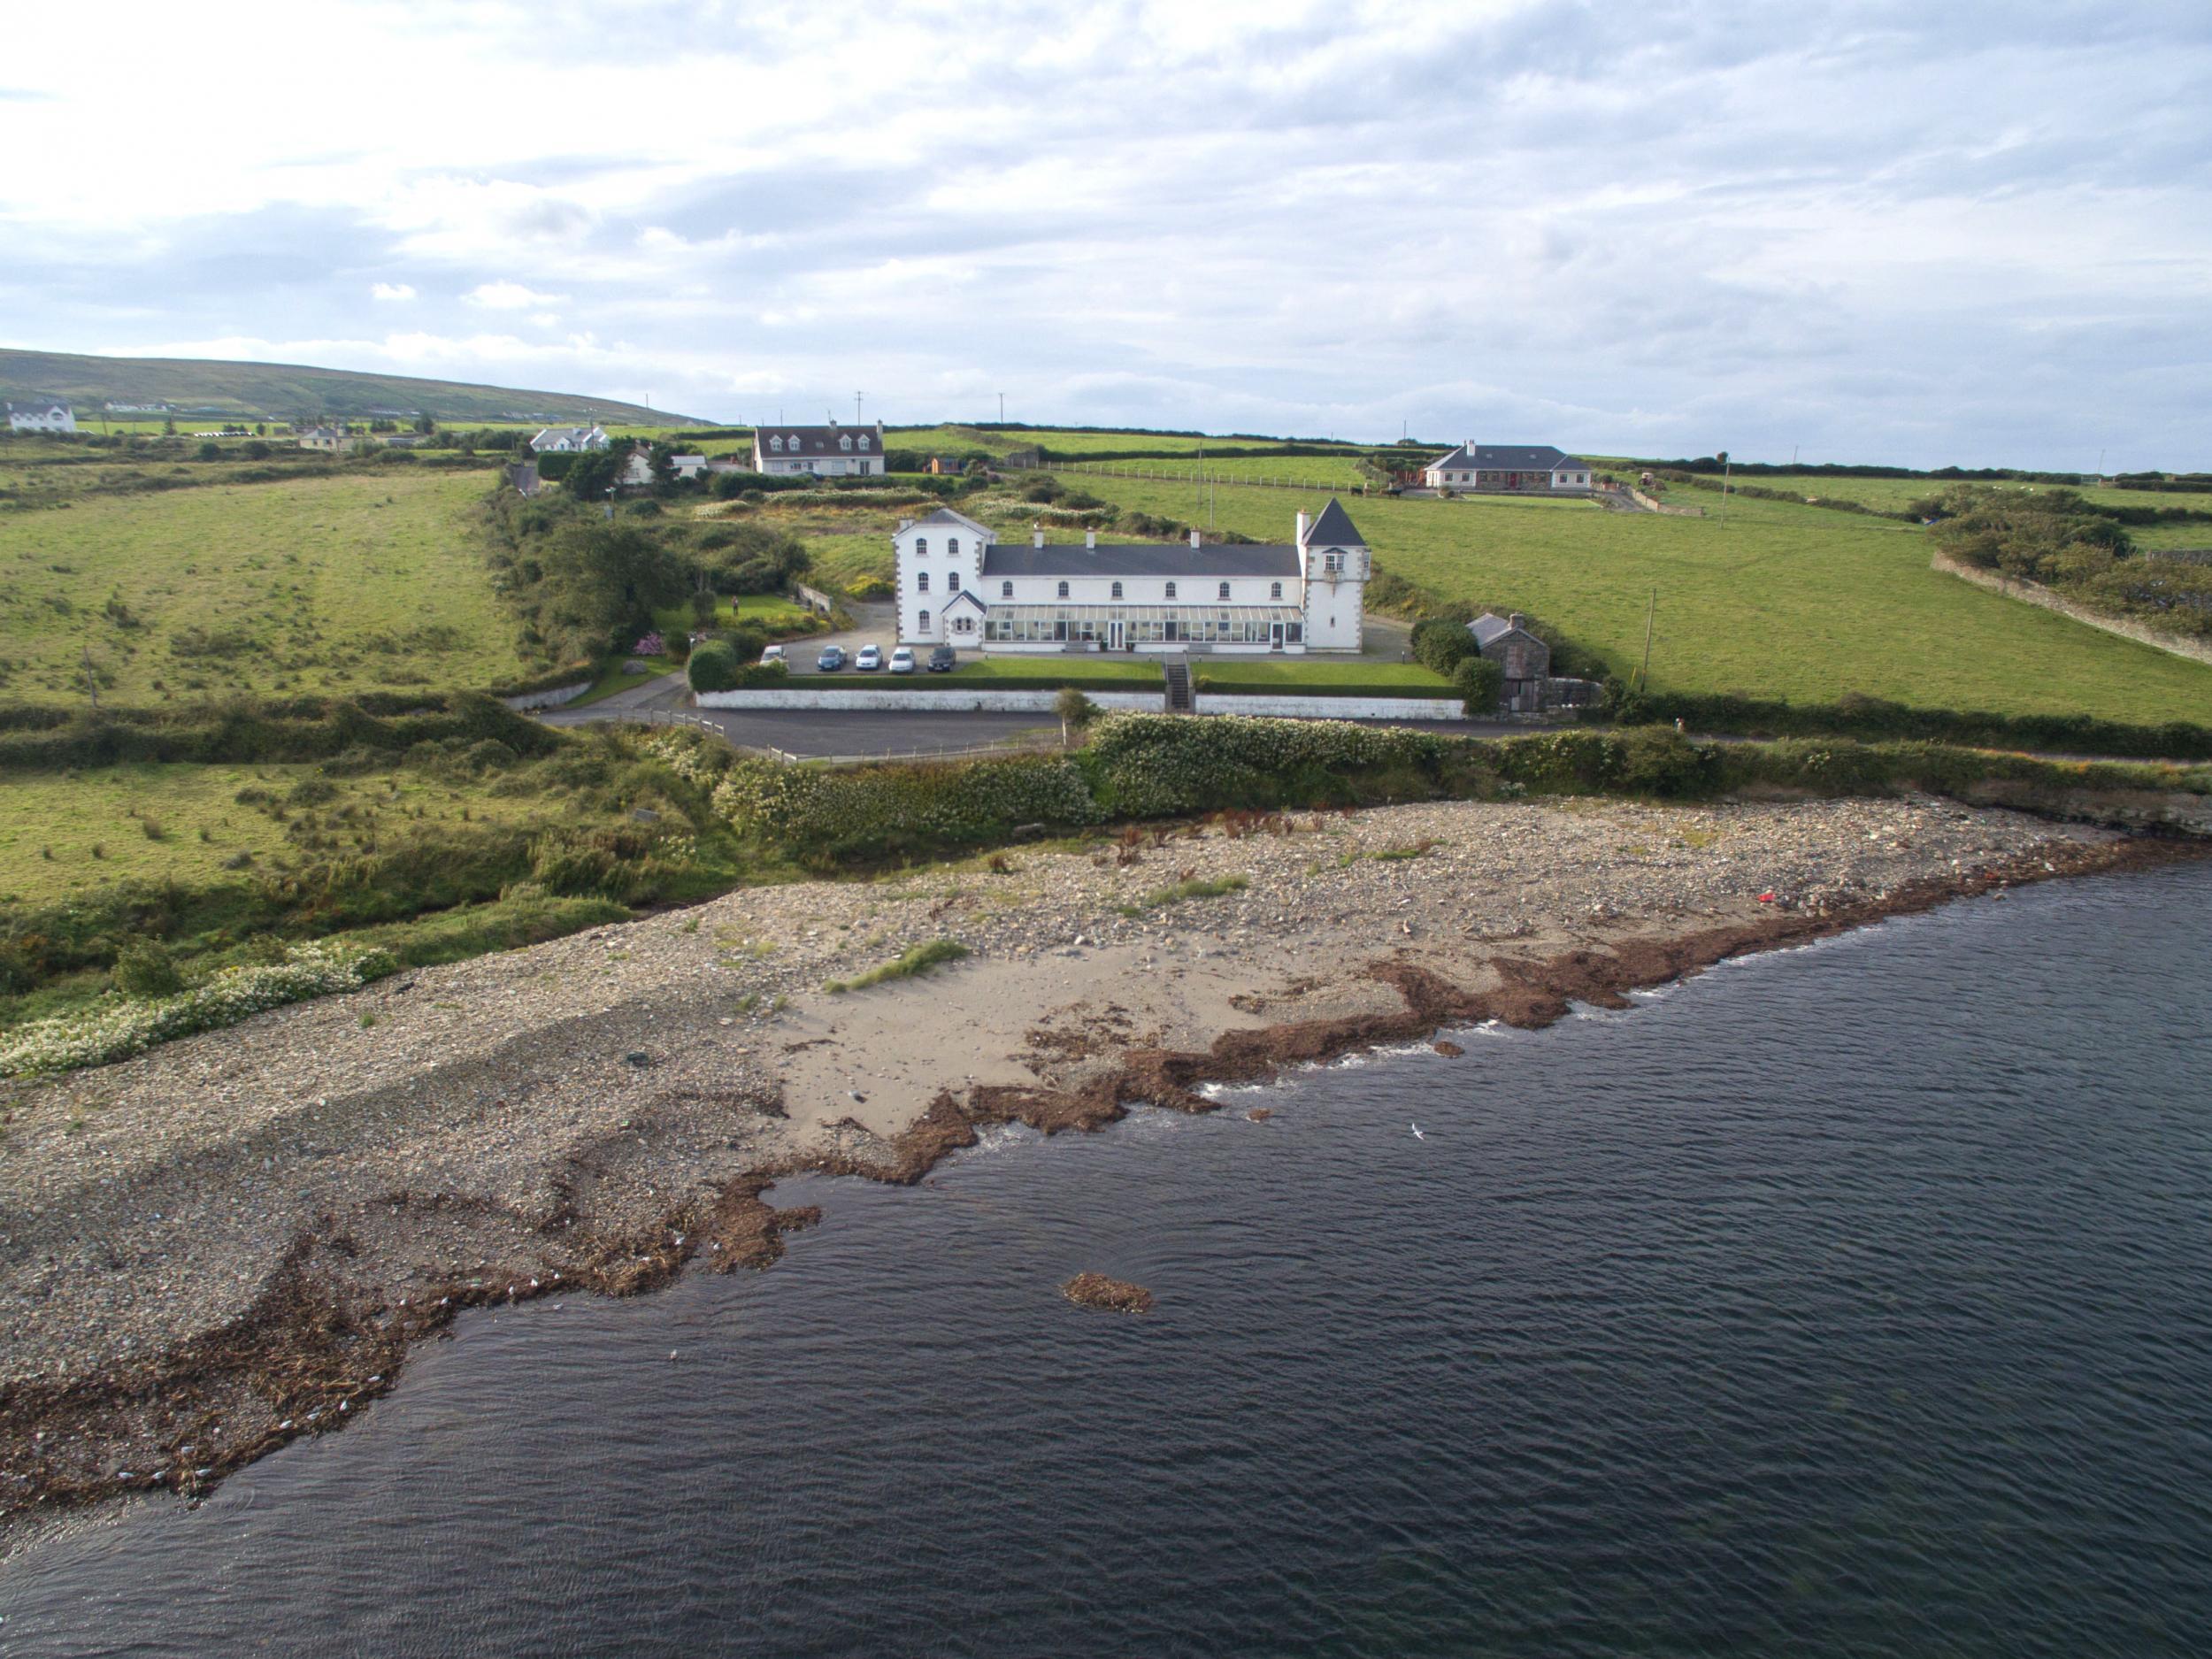 This former coast guard HQ is perched on Ireland’s rugged West Coast